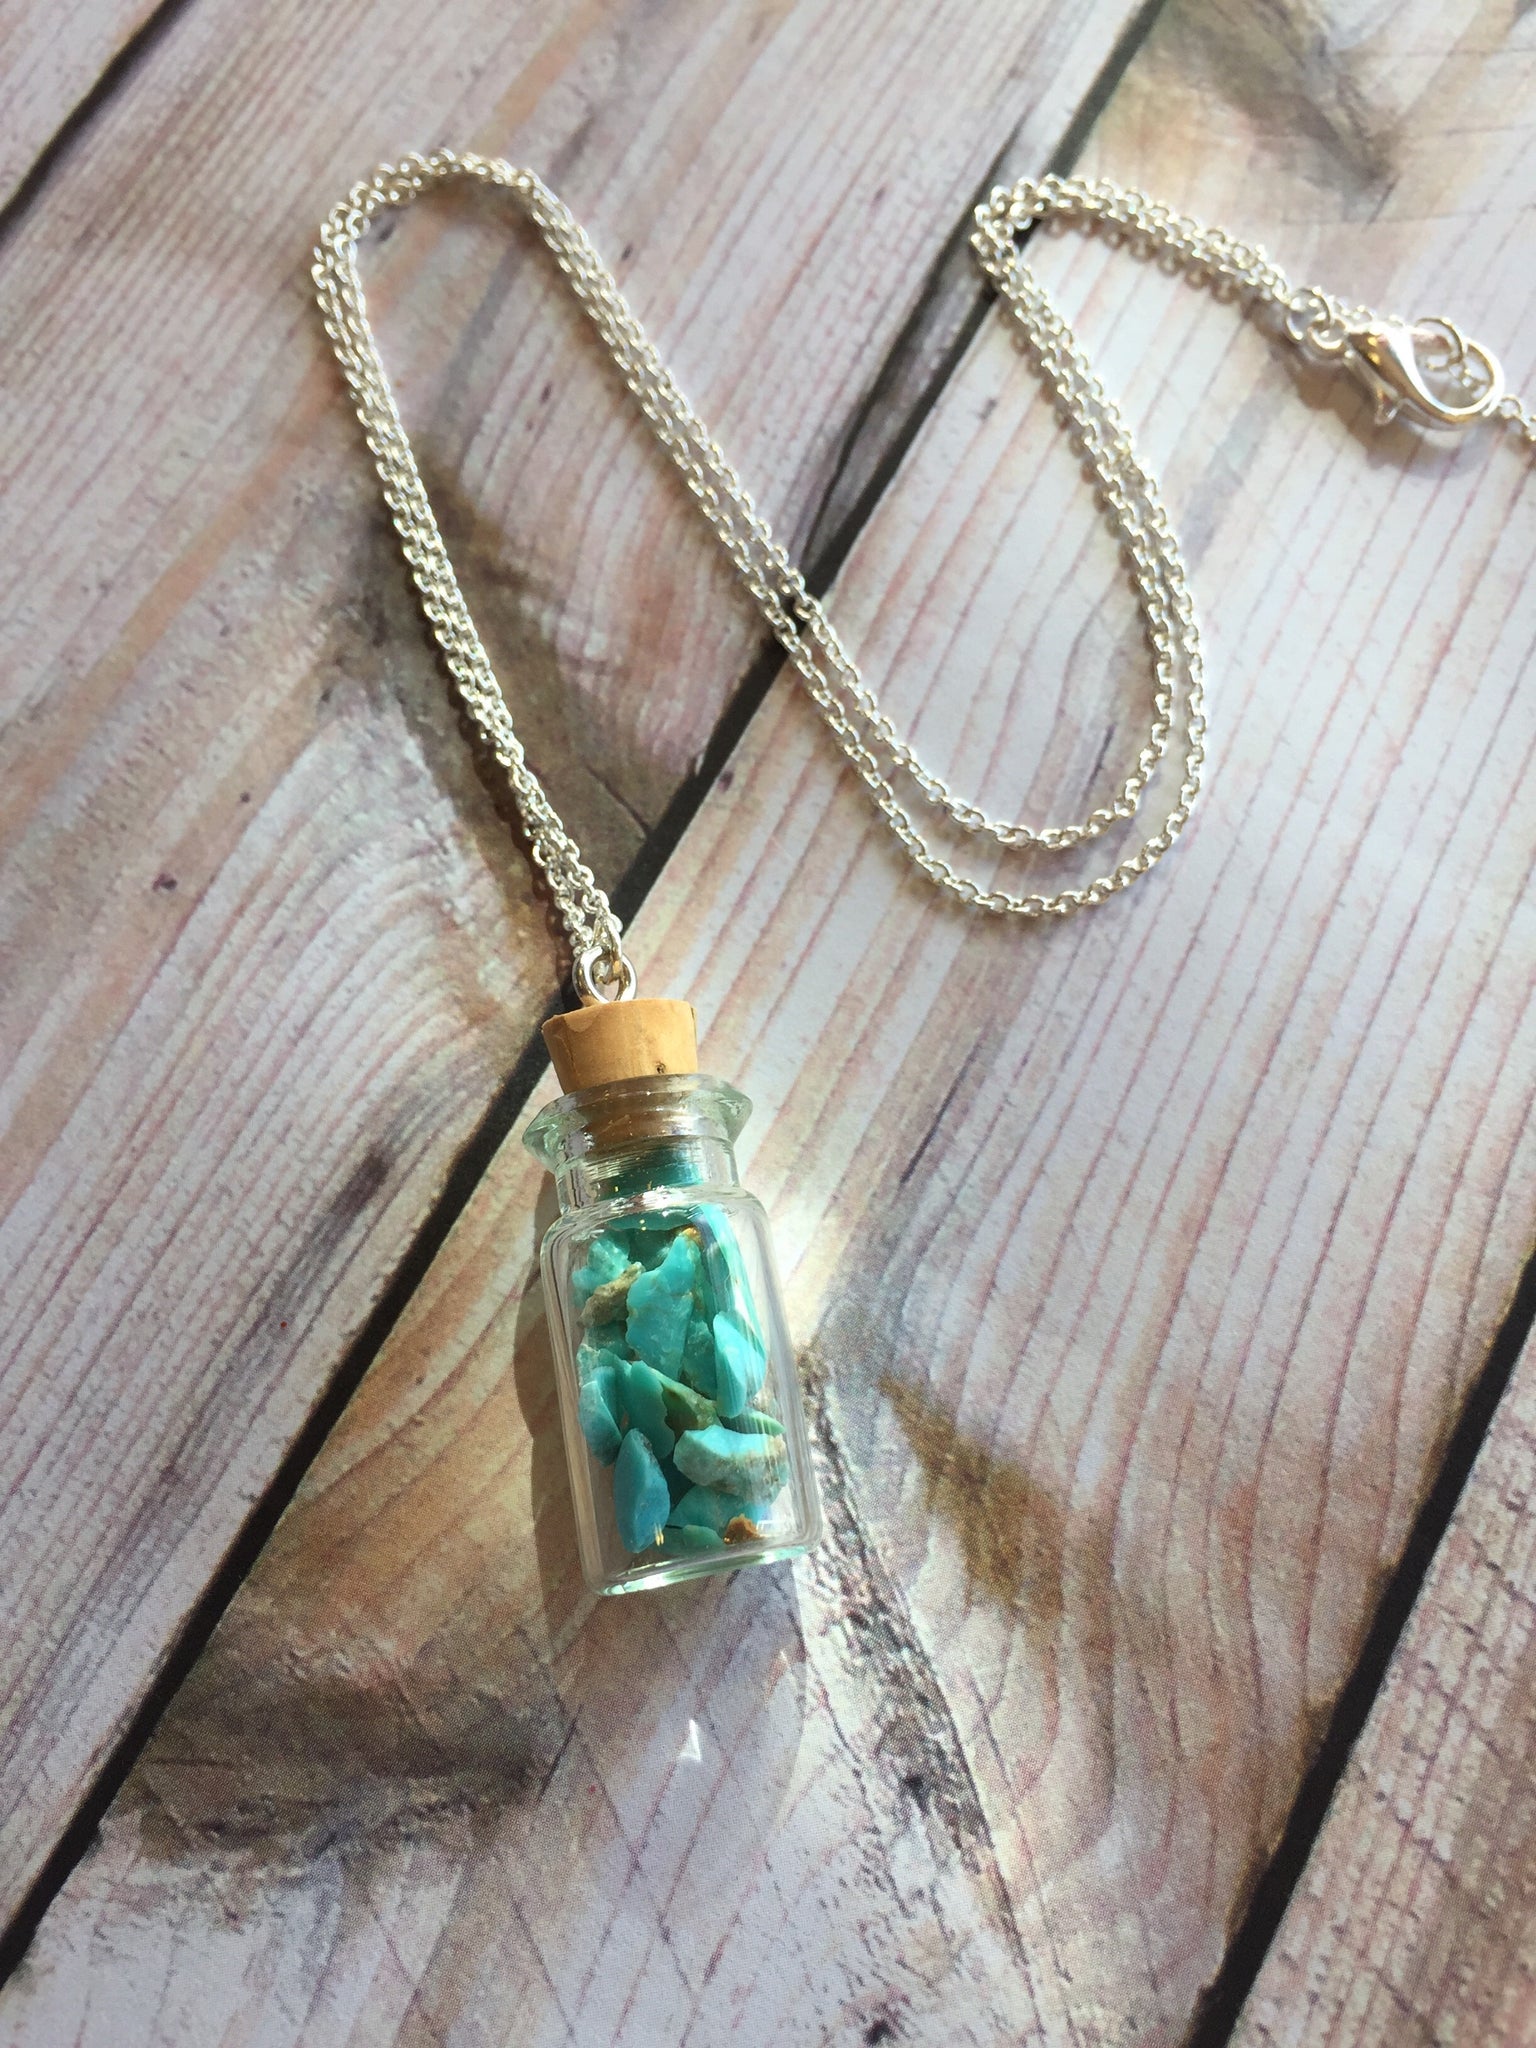 Turquoise in a Bottle Necklace